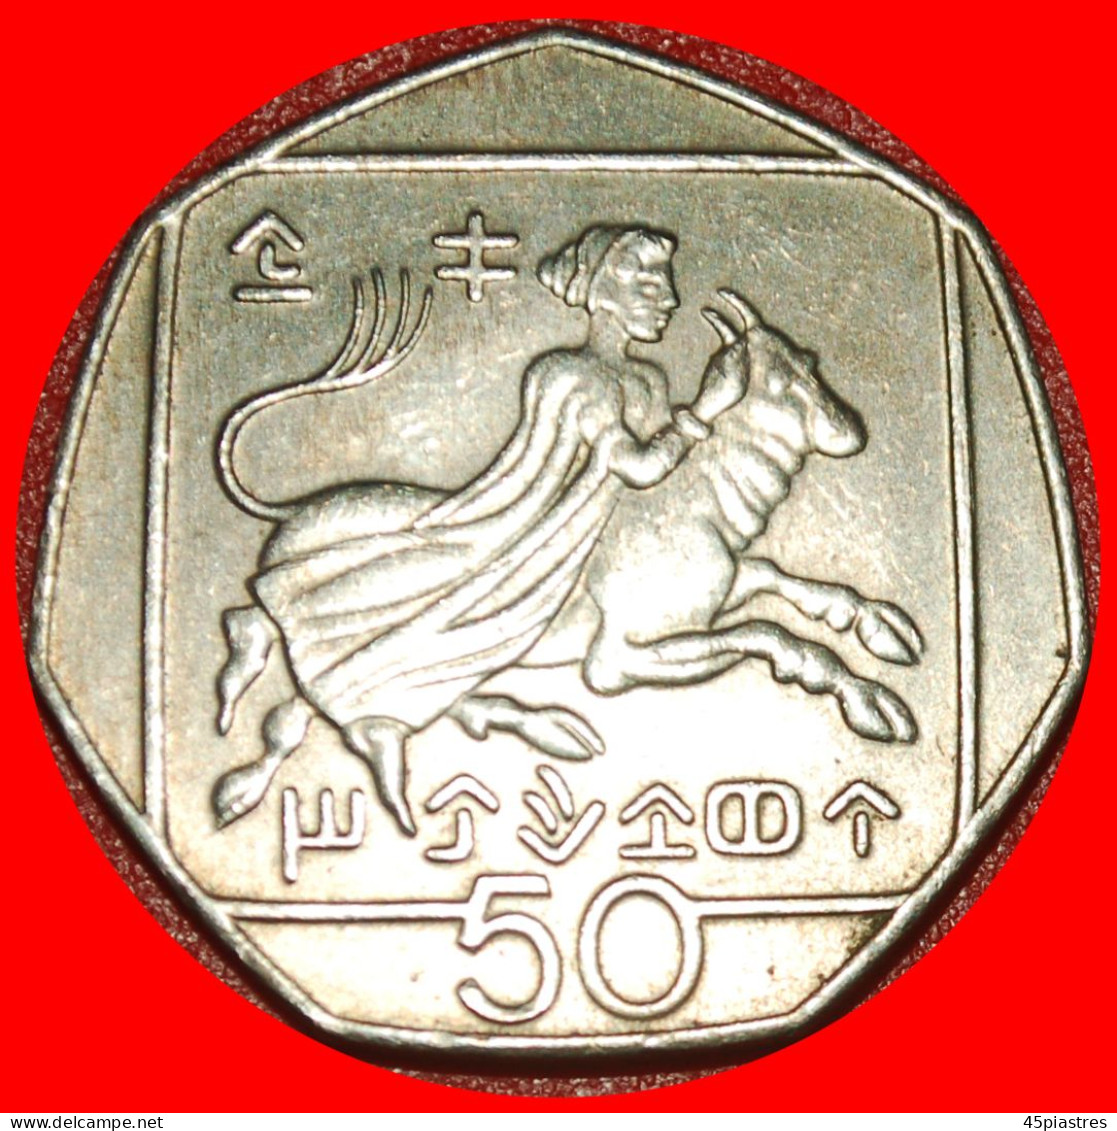 * SLOVAKIA (1991-2004): CYPRUS  50 CENTS 2002 MINT LUSTRE HEPTAGON~ABDUCTION OF EUROPA!· LOW START ·  NO RESERVE! - Zypern